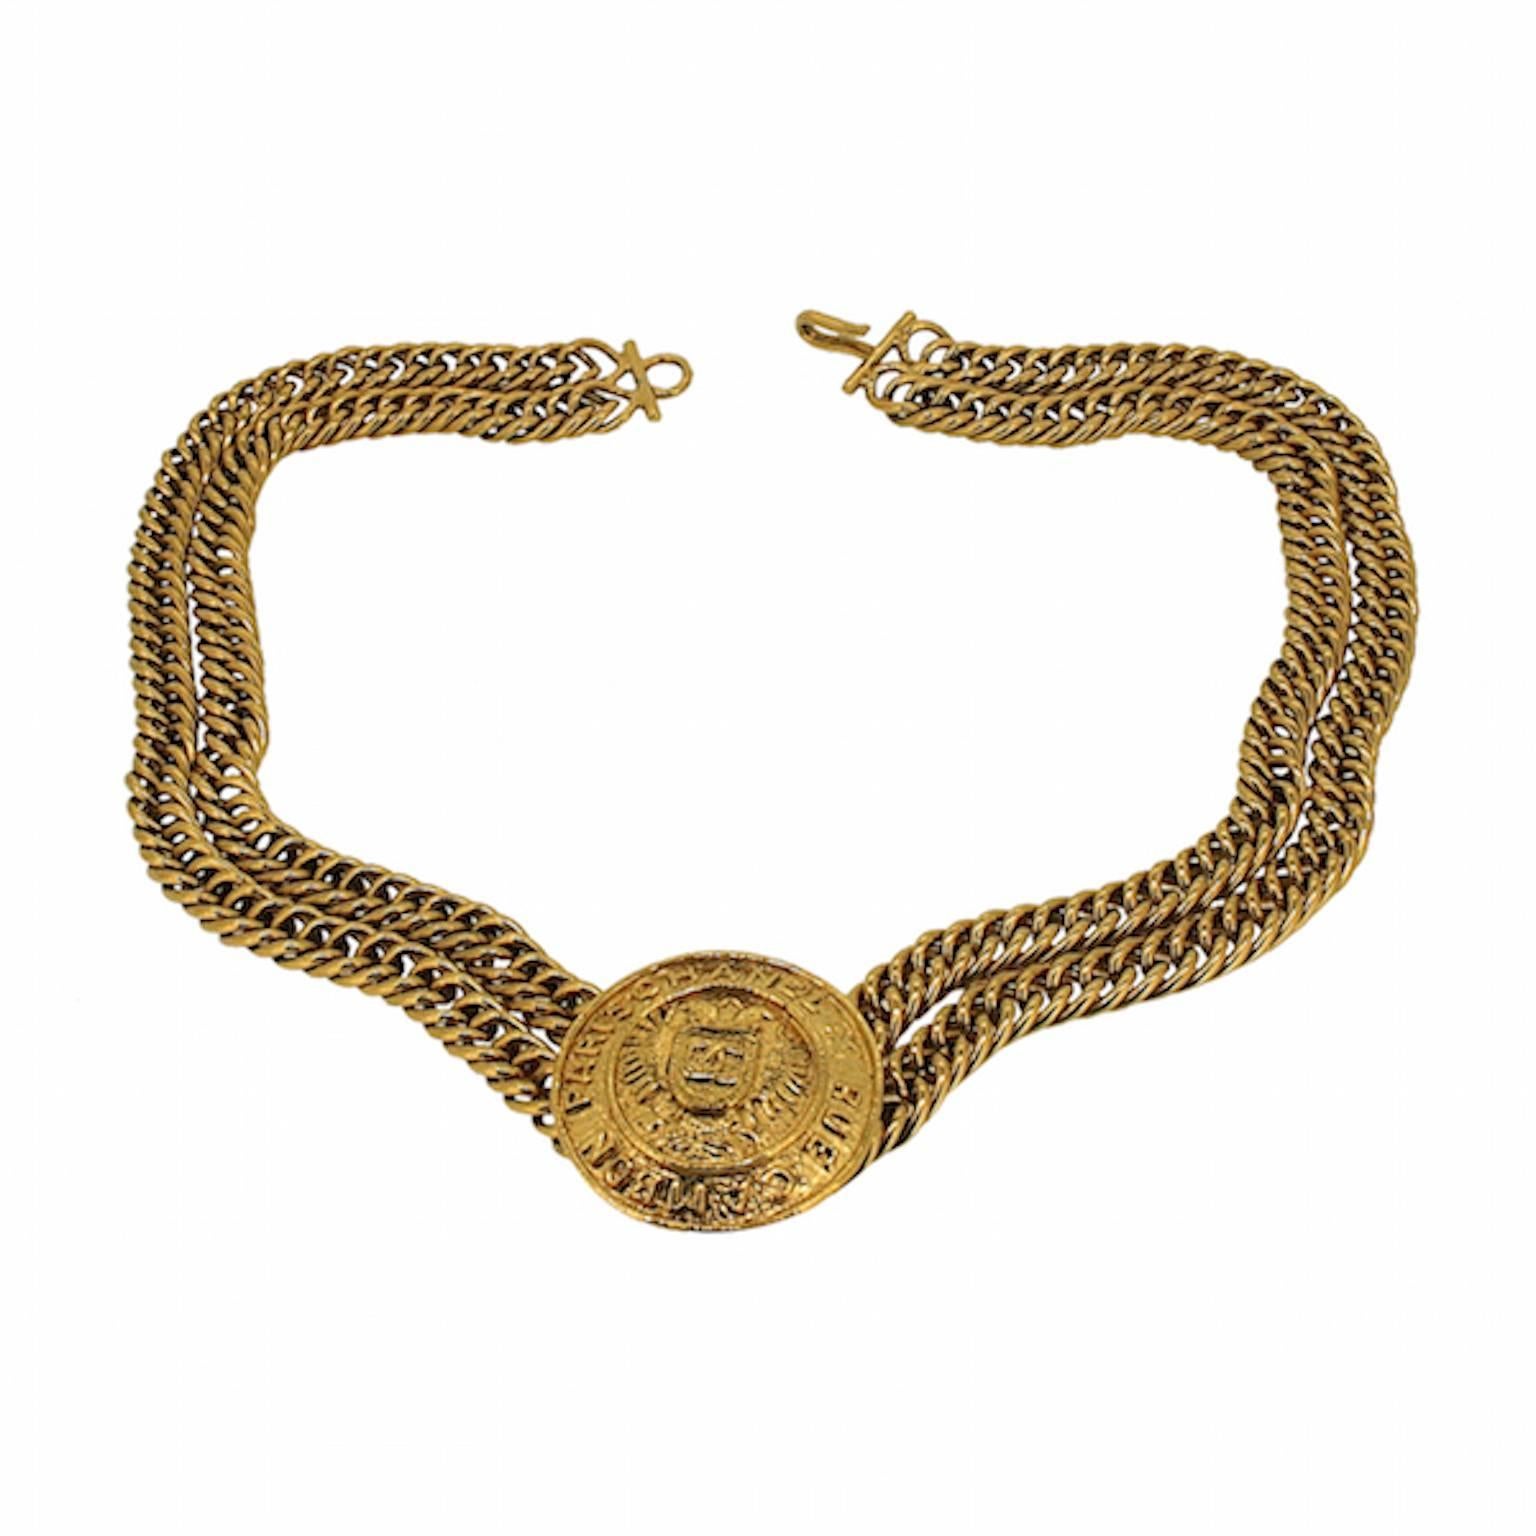 This show-stopping necklace is a fine example of Chanel's craftsmanship. It features a timeless and wearable design.
Condition Report:
Excellent
The Details...
This gold plated necklace features two strands of curb link chain soldered together at a